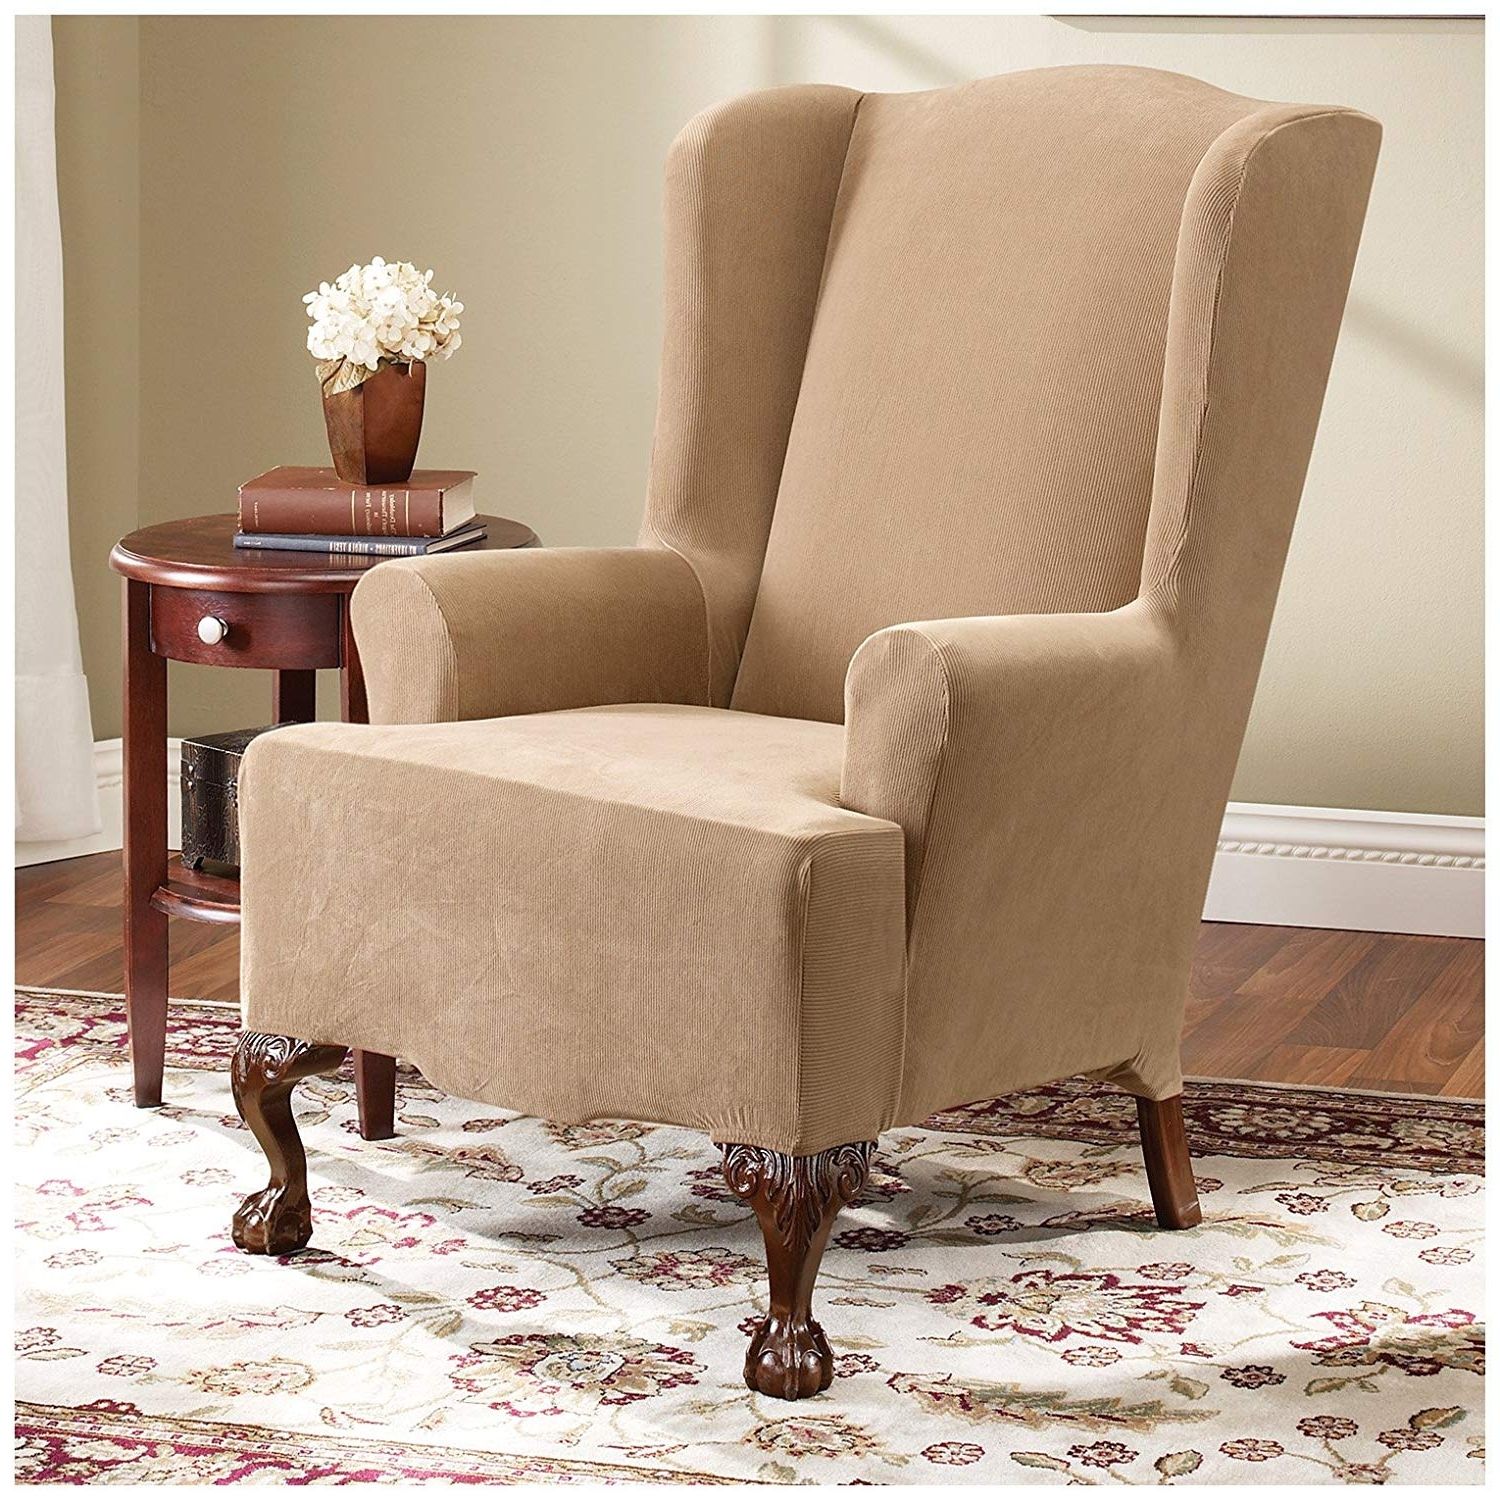 Pearson Grey Slipcovered Side Chairs Pertaining To Fashionable Amazon: Sure Fit Stretch Pearson Wing Chair Slipcover, Dark Flax (View 8 of 20)